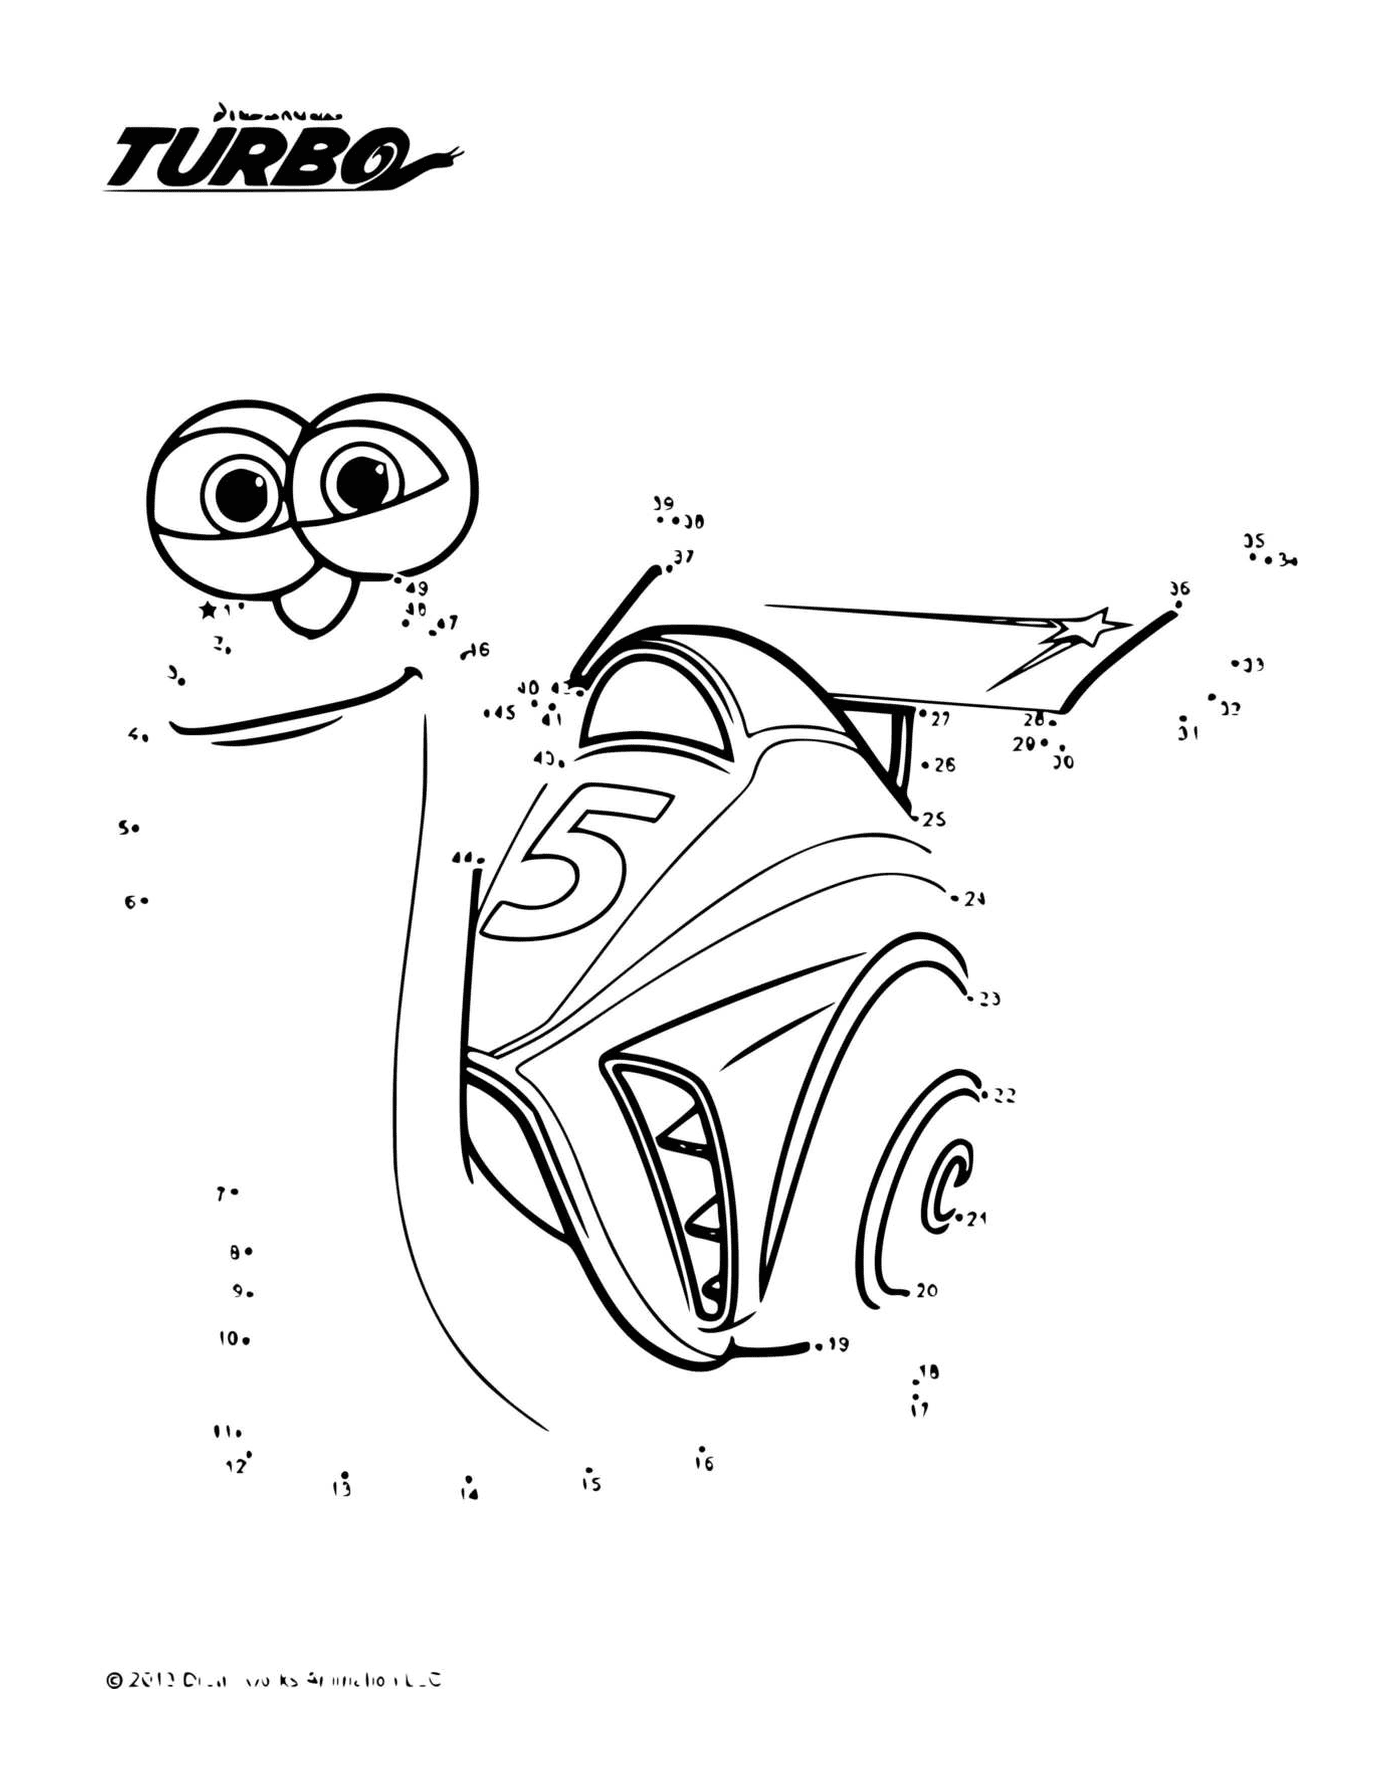  Turbo snail connects points for a race car 